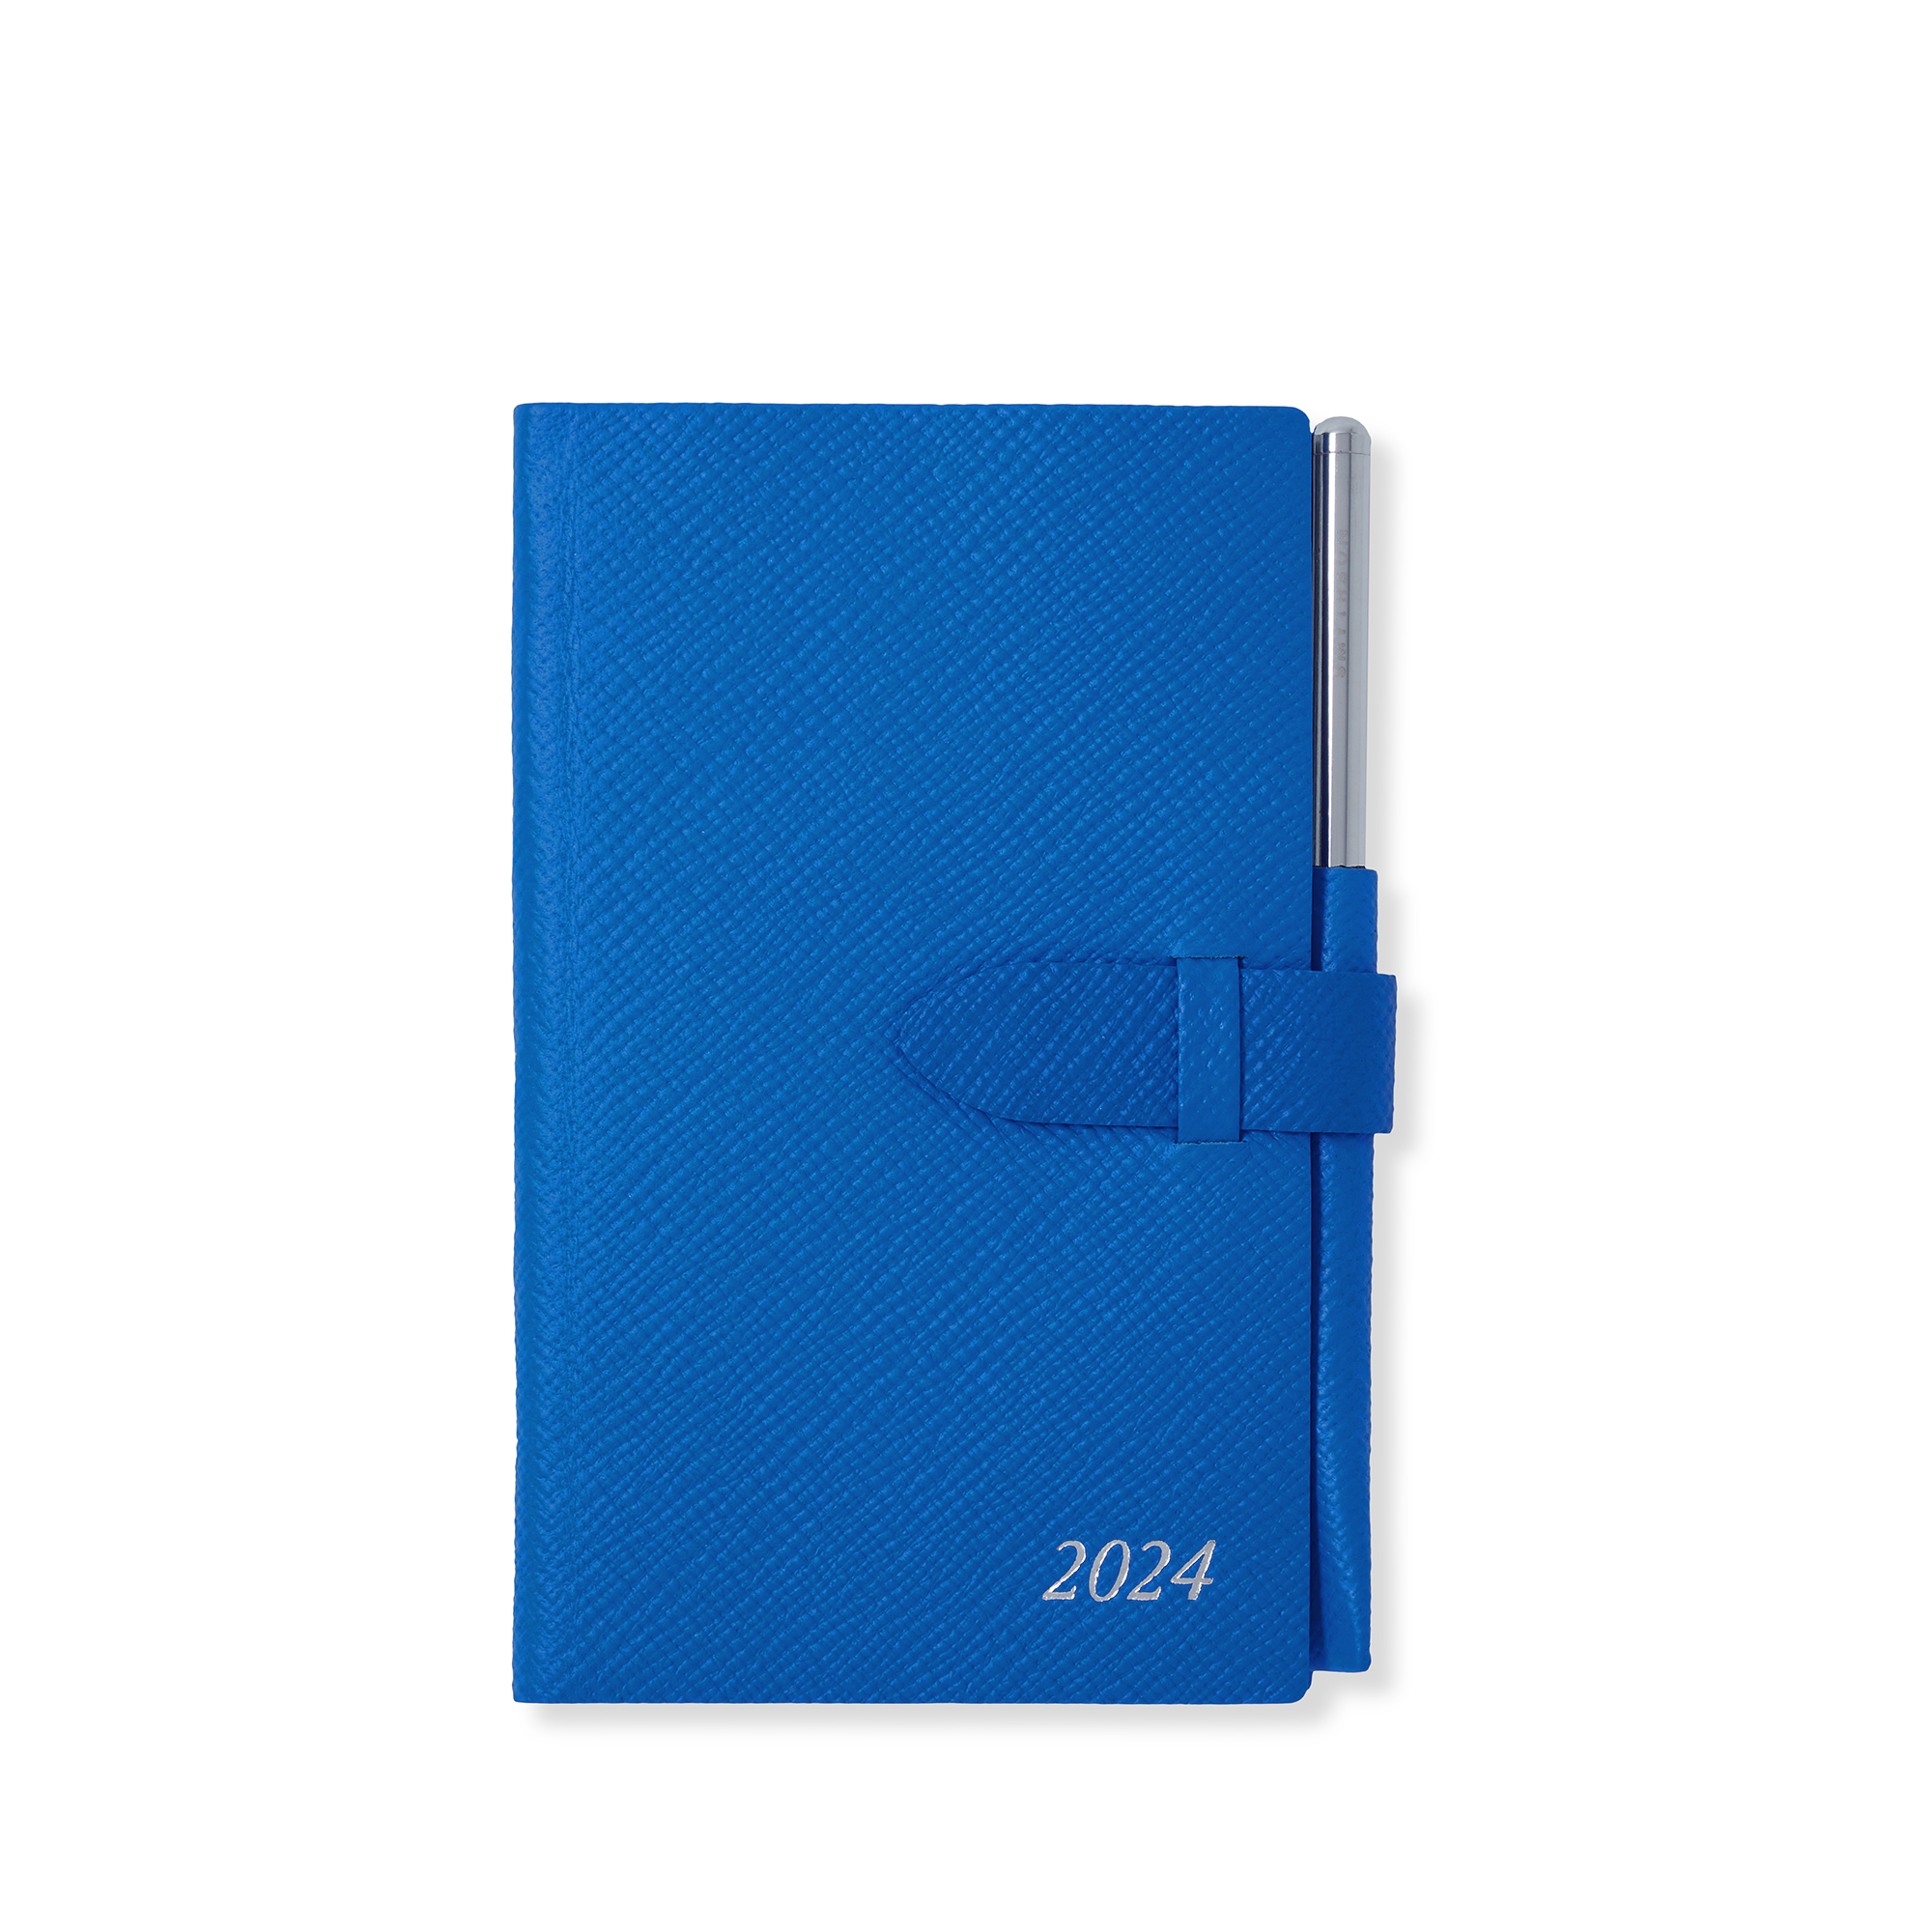 Smythson 2024 Panama Weekly Agenda With Pencil In Lapis